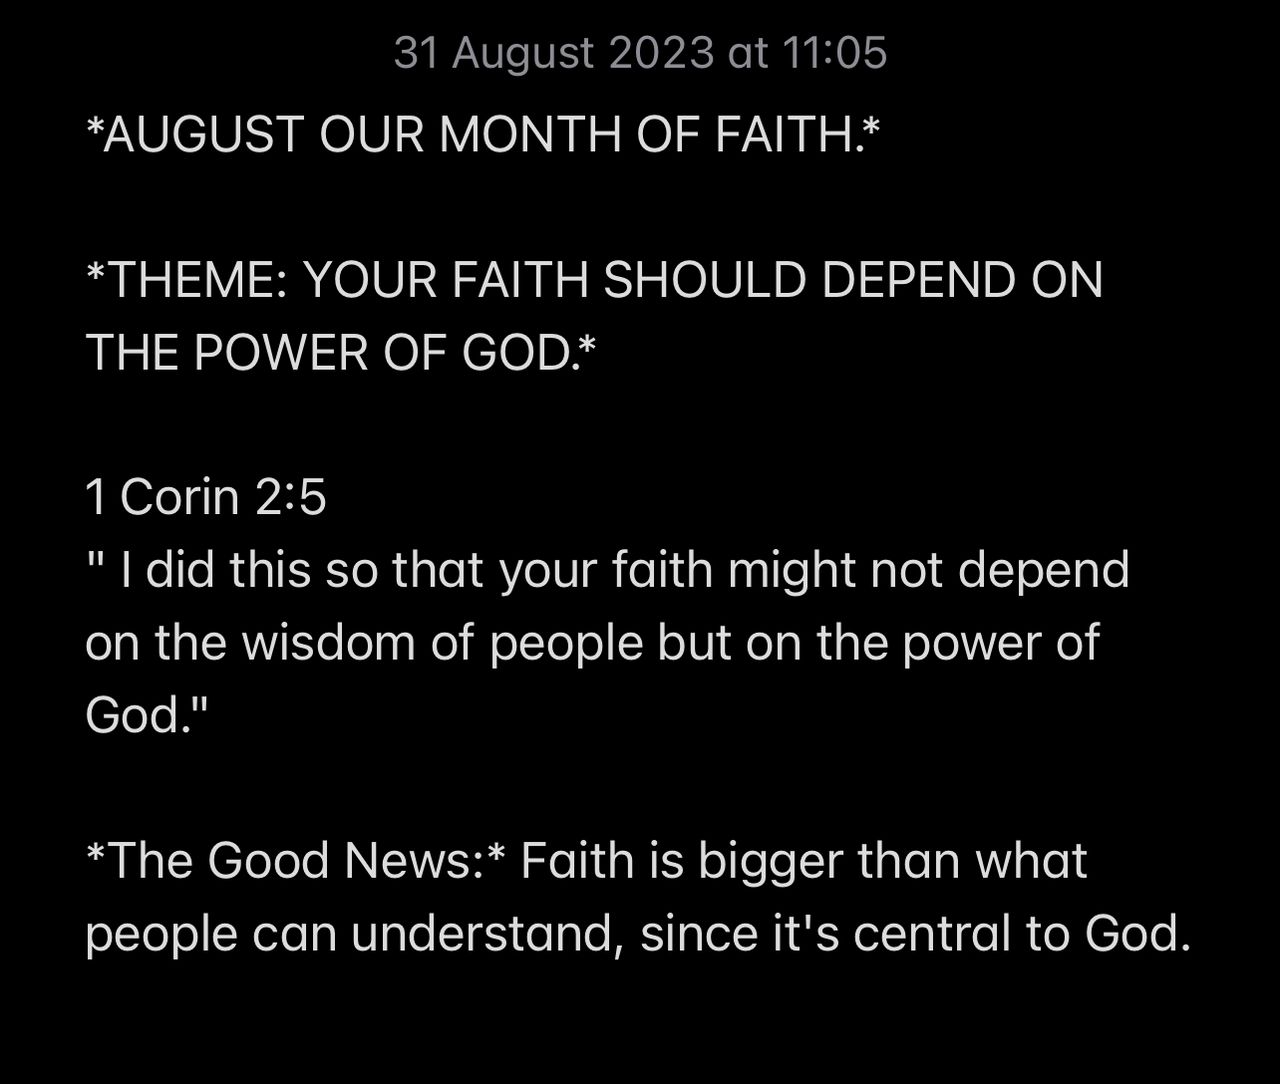 YOUR FAITH SHOULD DEPEND ON THE POWER OF GOD.